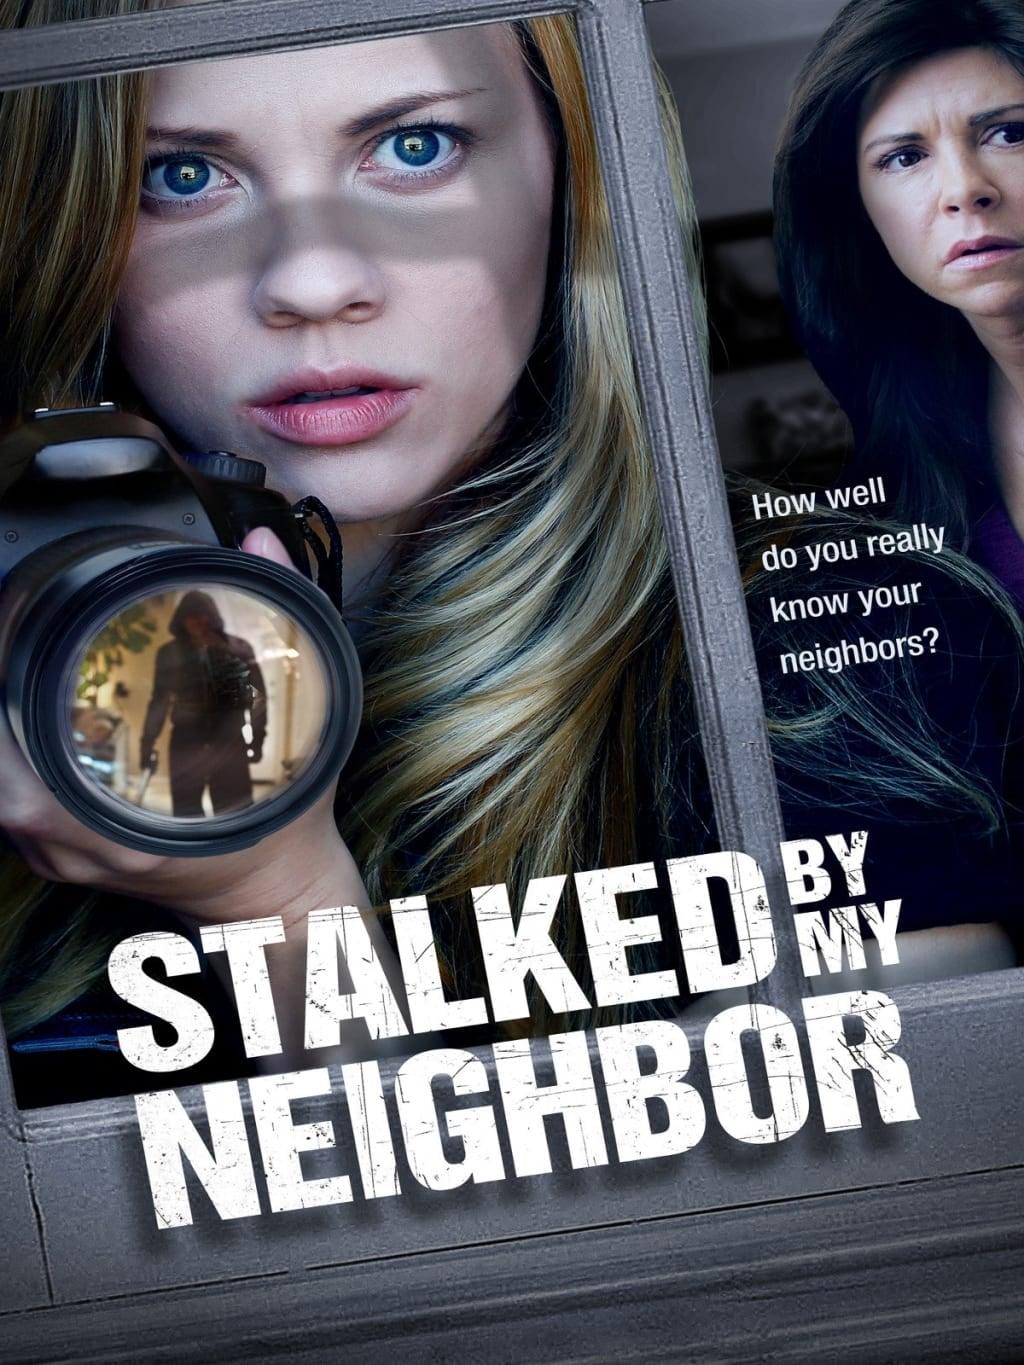 Stalked by My Neighbor poster